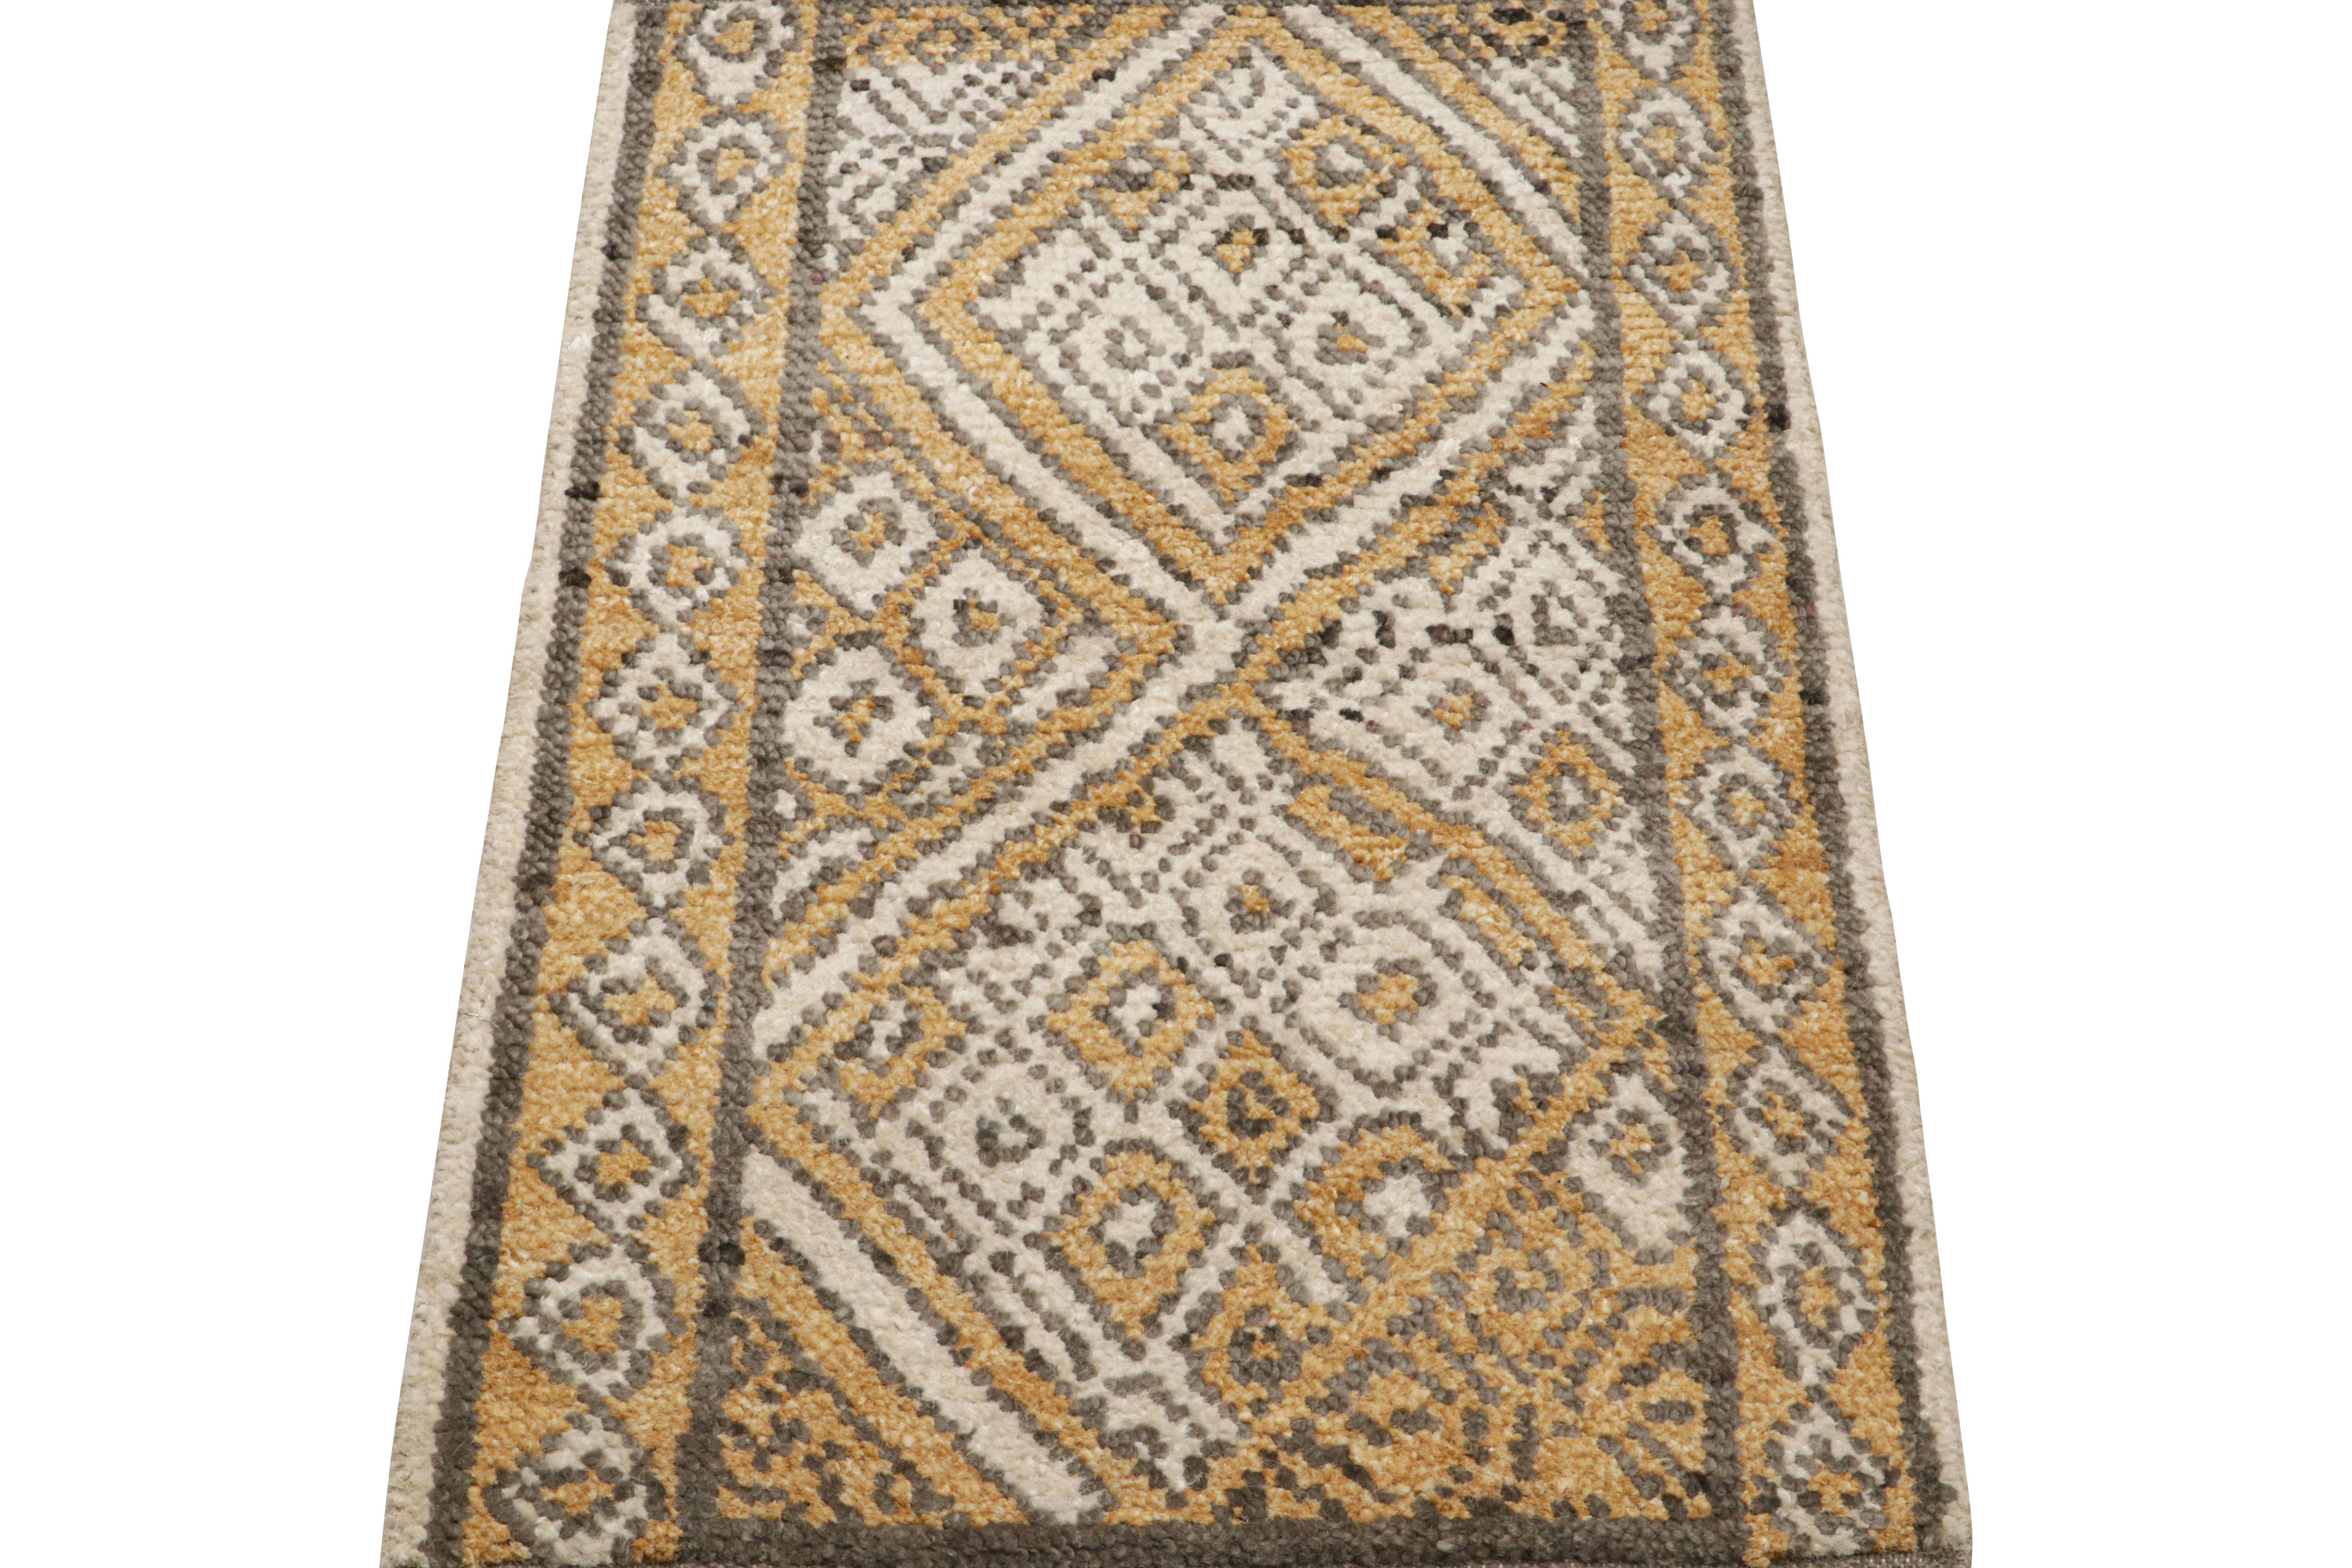 Hand-knotted in wool and silk, this 2x3 Moroccan rug features a ribbed texture inspired from Boucherouite-style pieces and similar textiles in the primitivist Berber tribal style 

On the Design: 

Connoisseurs may admire the subtle appeal of the